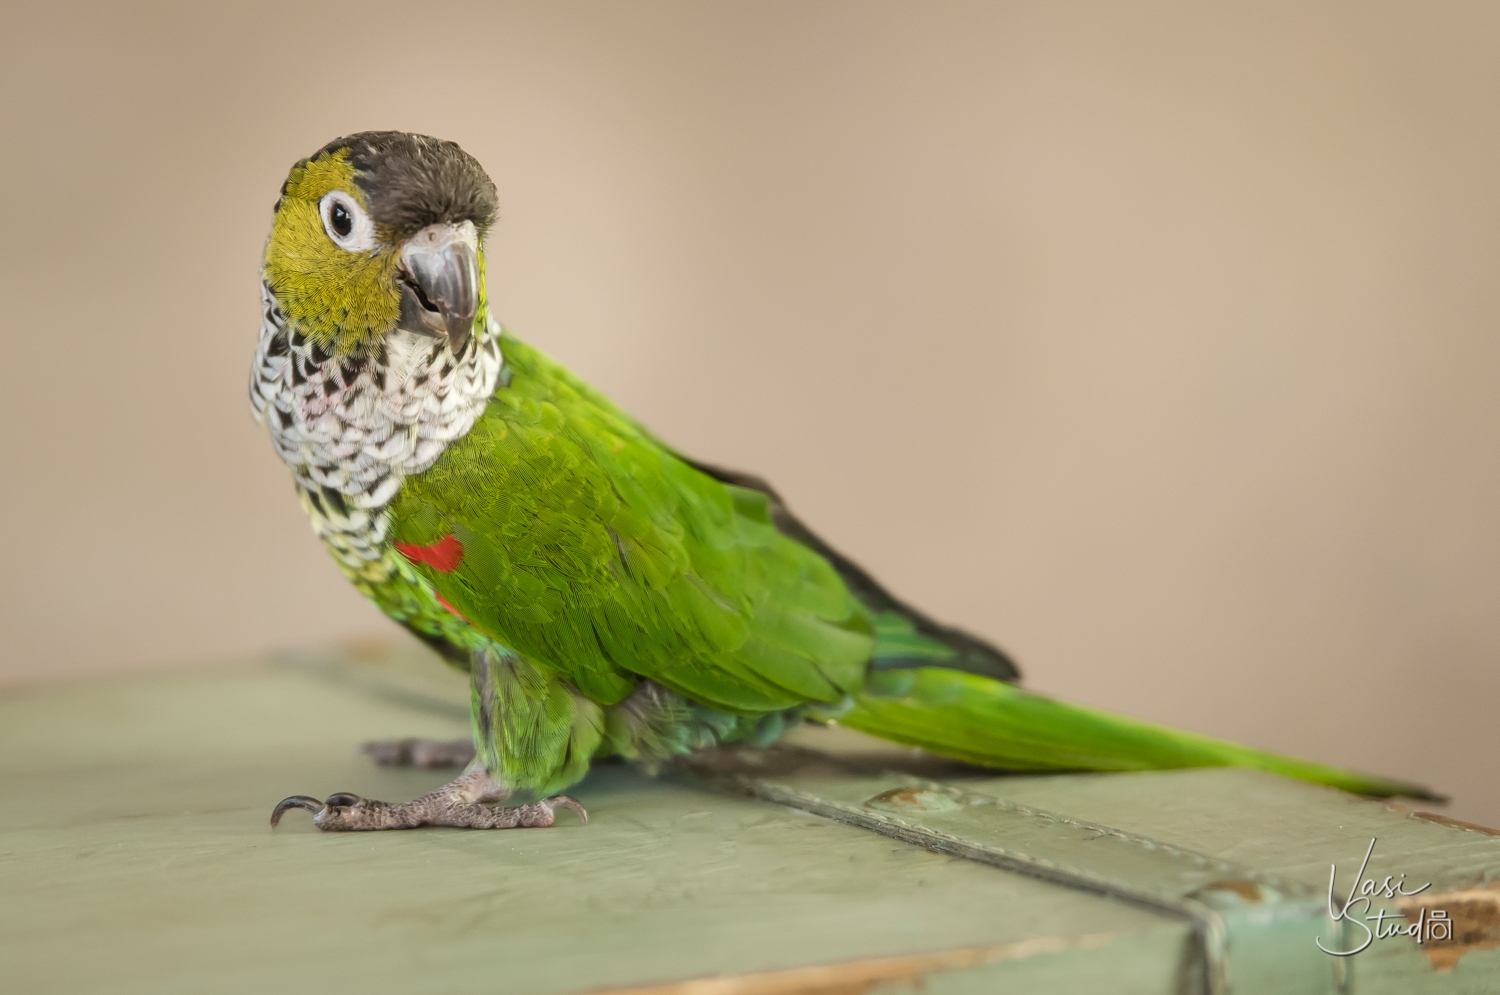 To schedule a pet/bird photography session in Palm Beach Gardens, call 561-307-9875